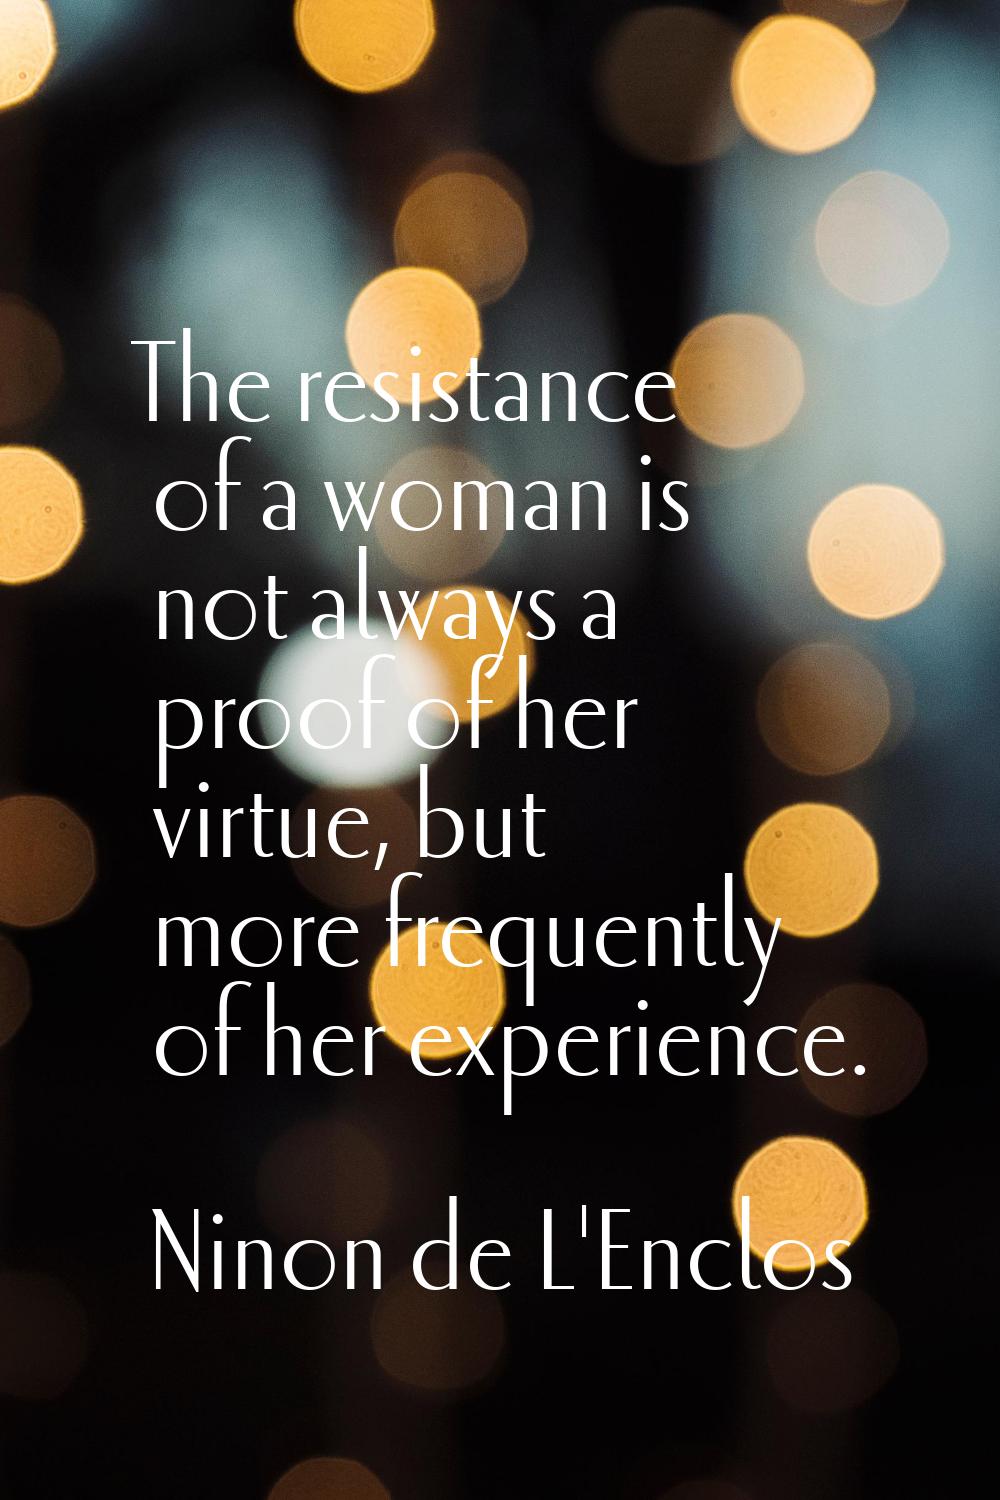 The resistance of a woman is not always a proof of her virtue, but more frequently of her experienc